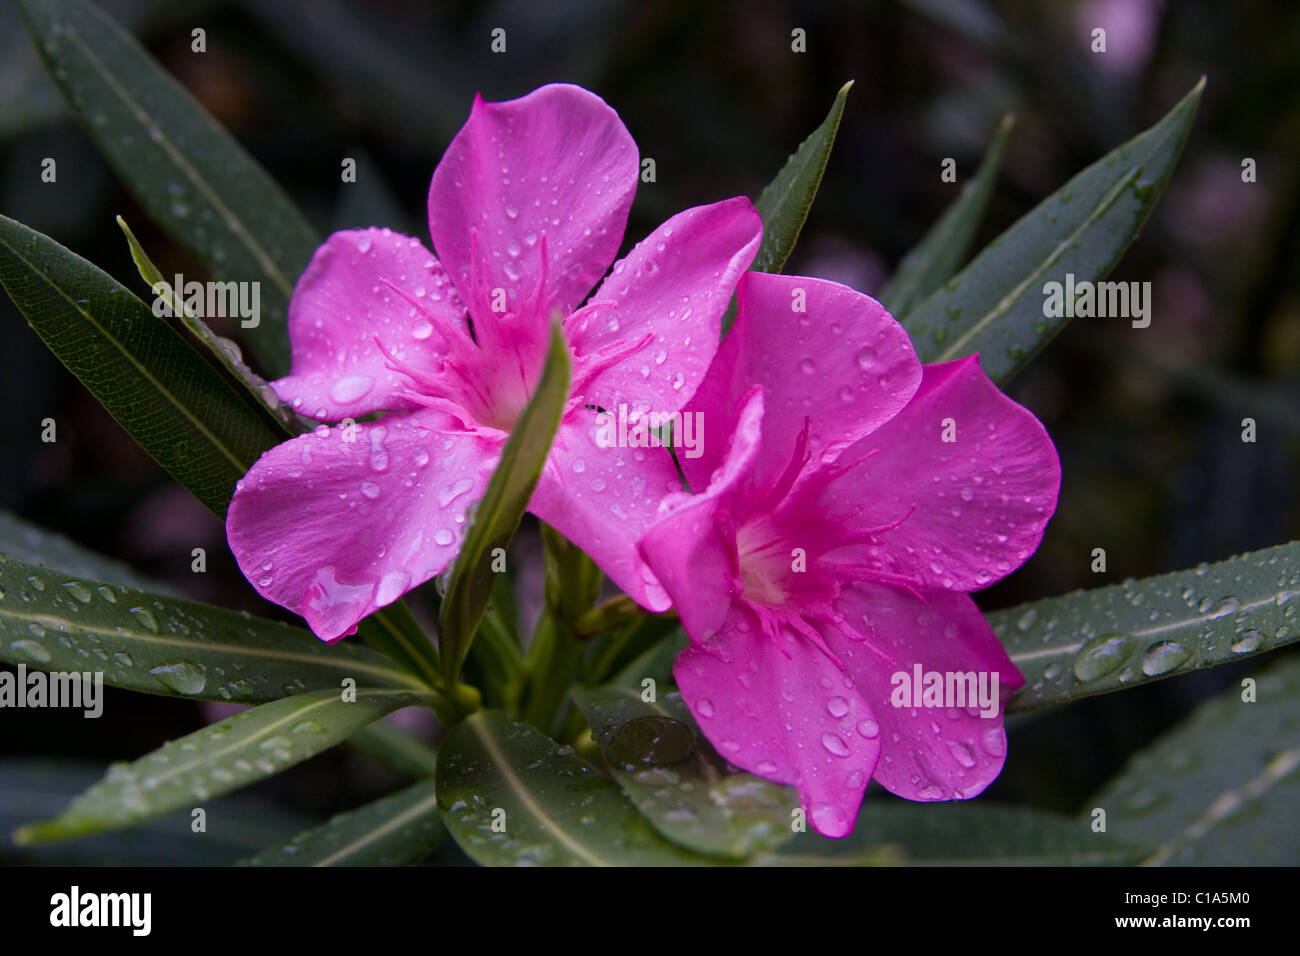 Beautiful but poisonous Oleander flower blossoms. Stock Photo